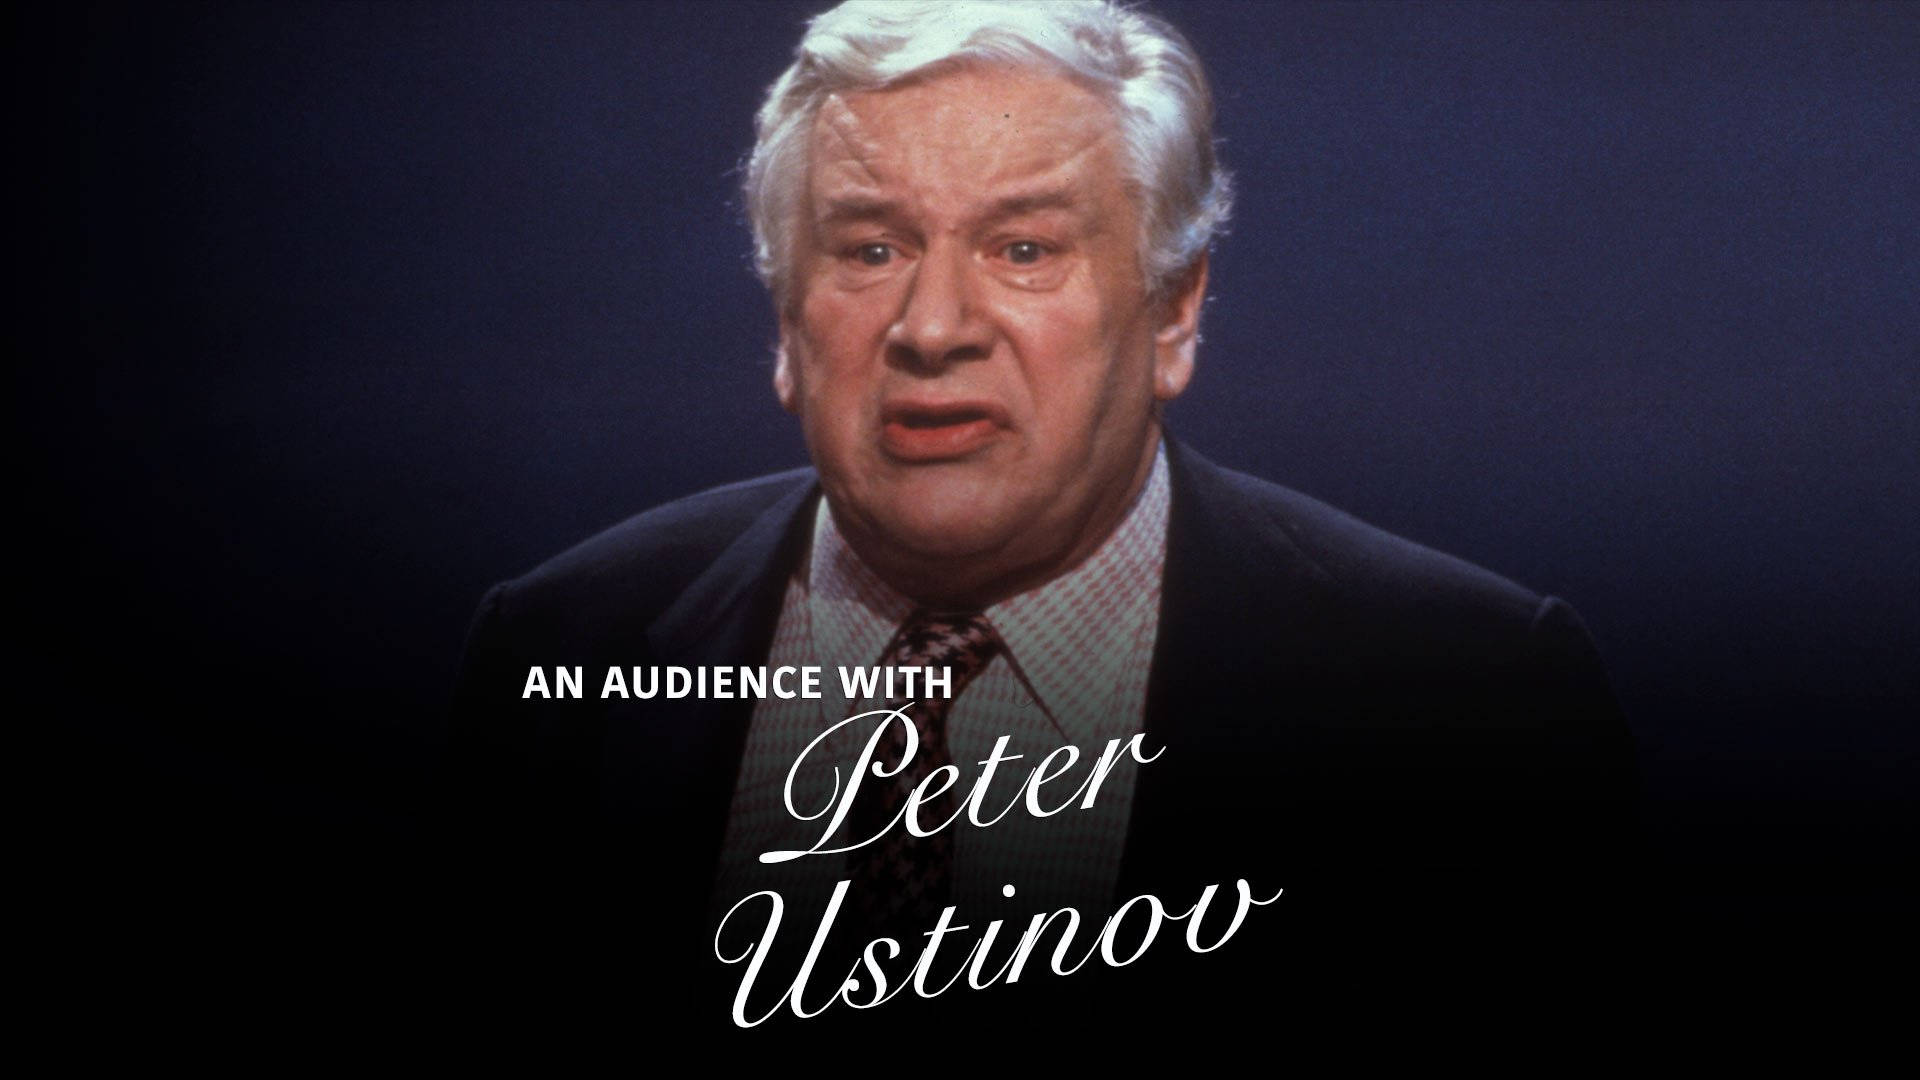 An Audience With Peter Ustinov Wallpaper